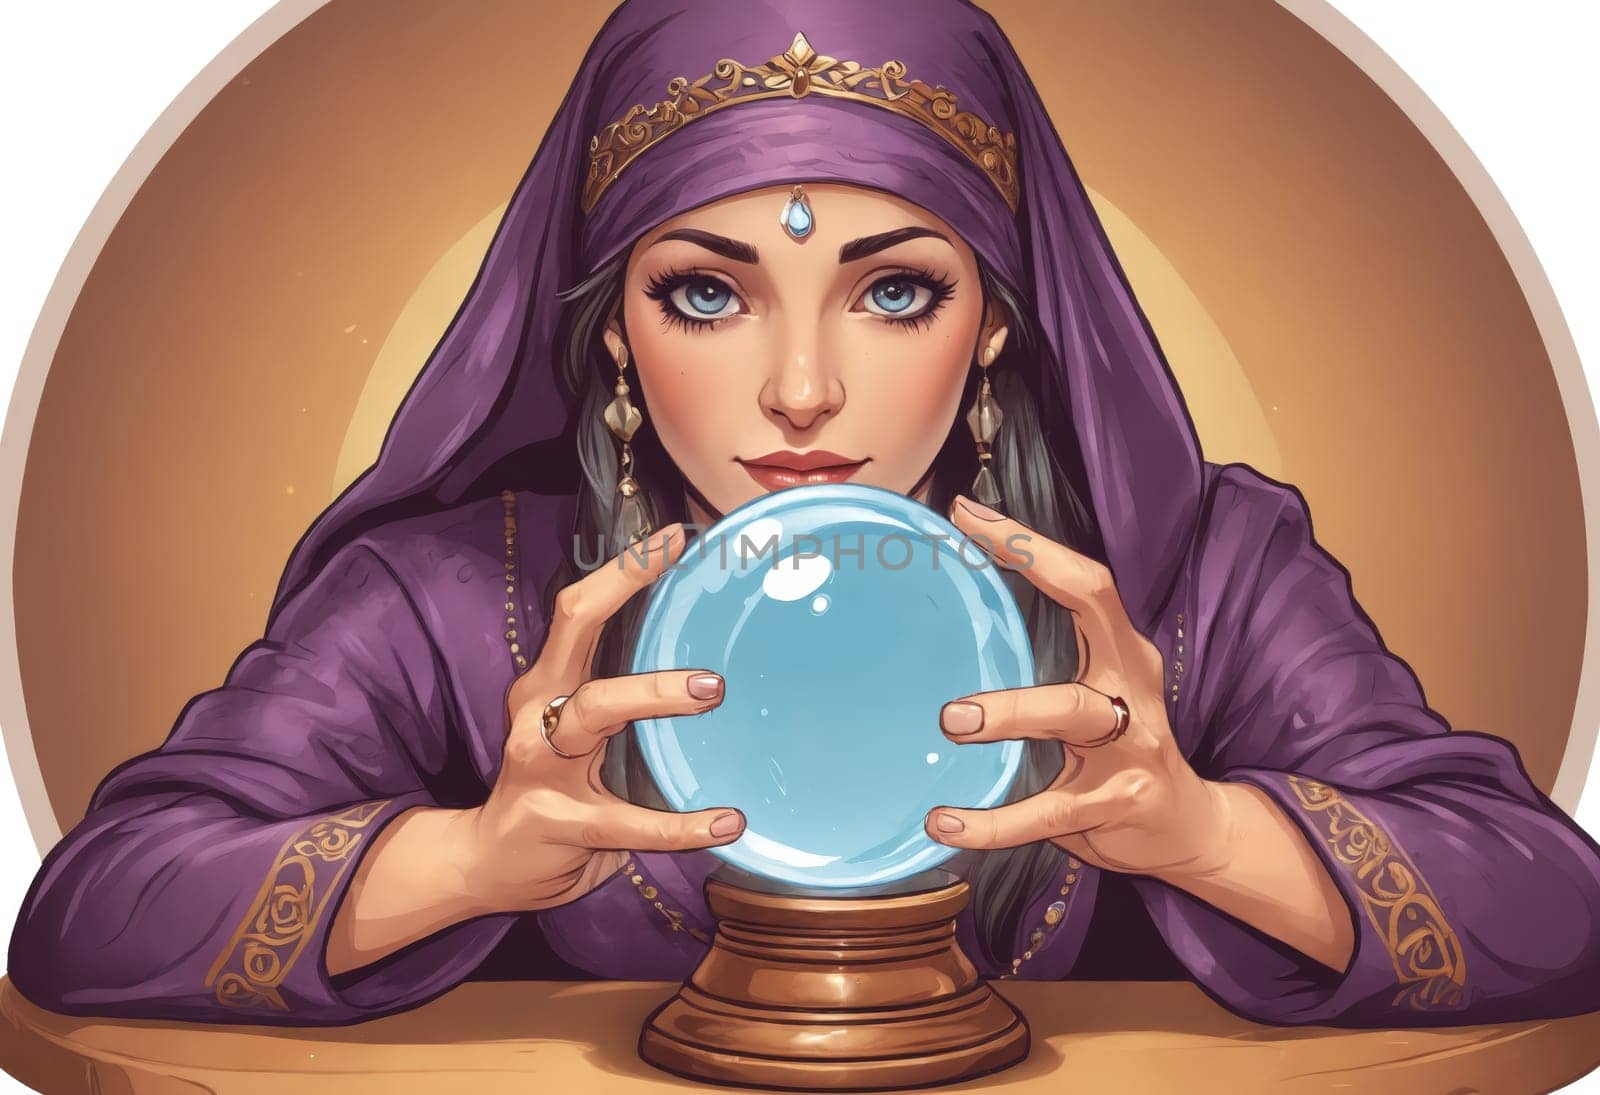 Enigmatic Oracle: Tarot Spread and Crystal Ball in Traditional Elegance by Andre1ns